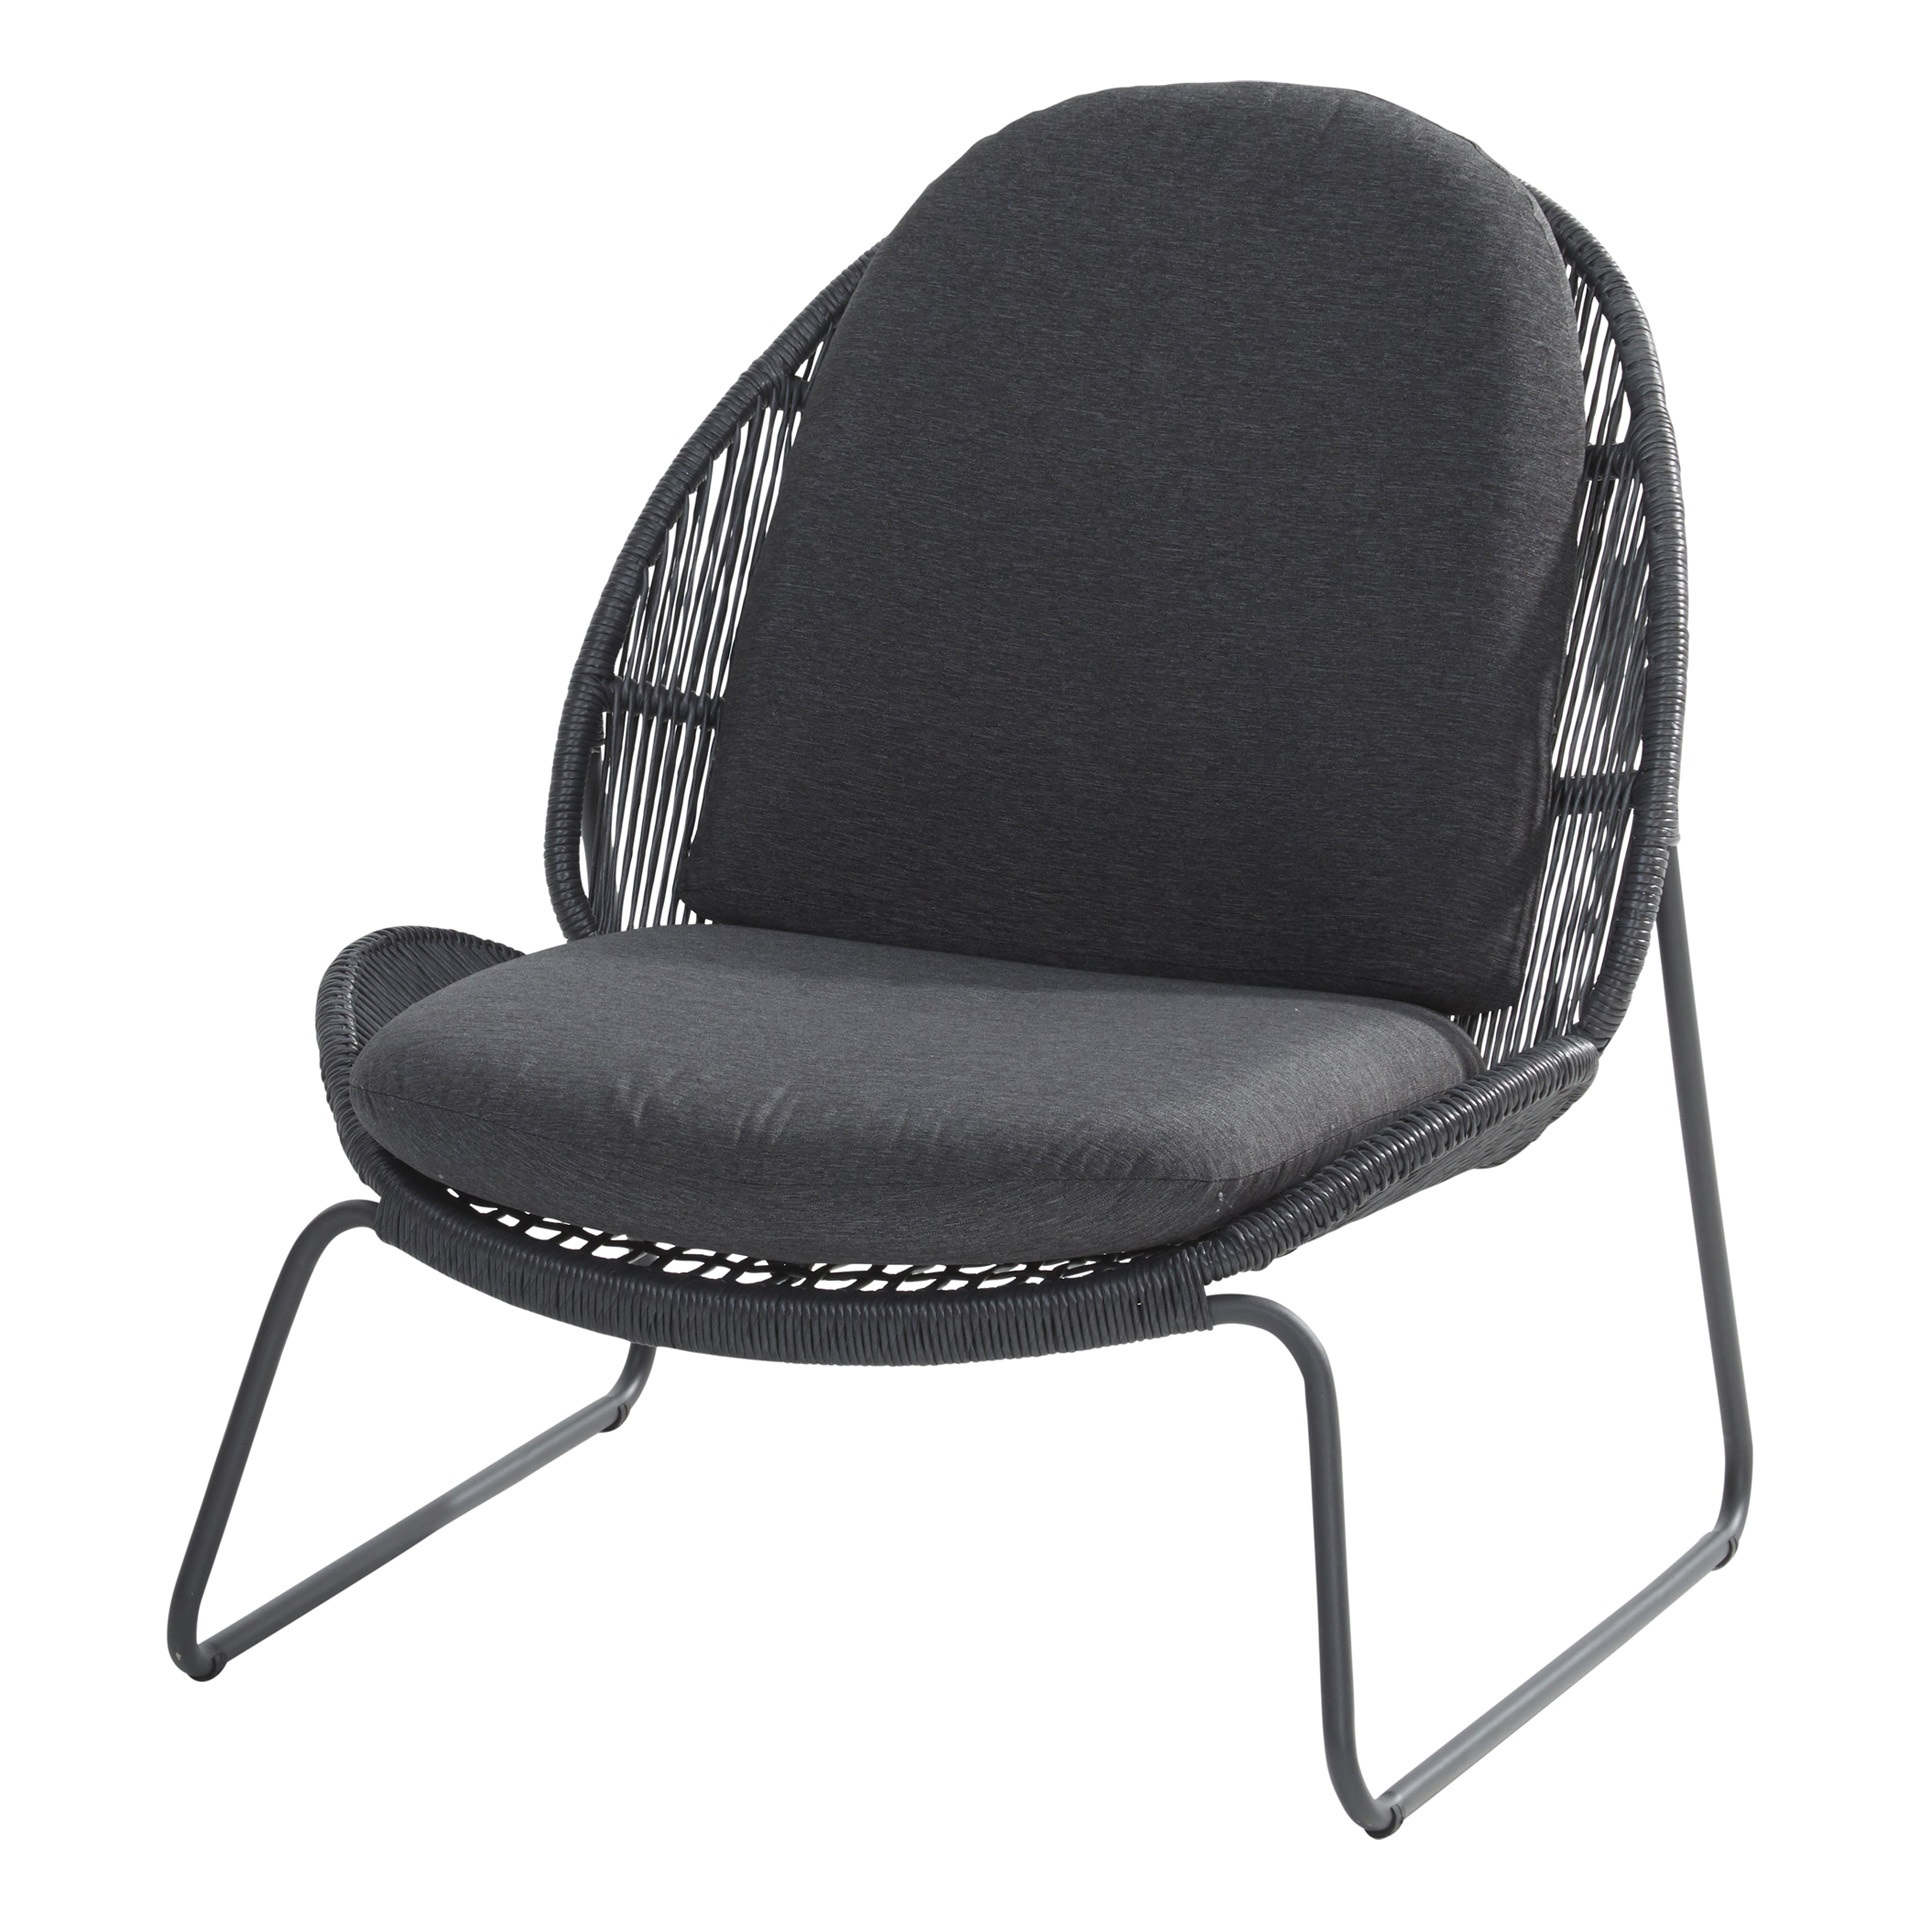 Delano Living chair with 2 cushions Antracite 